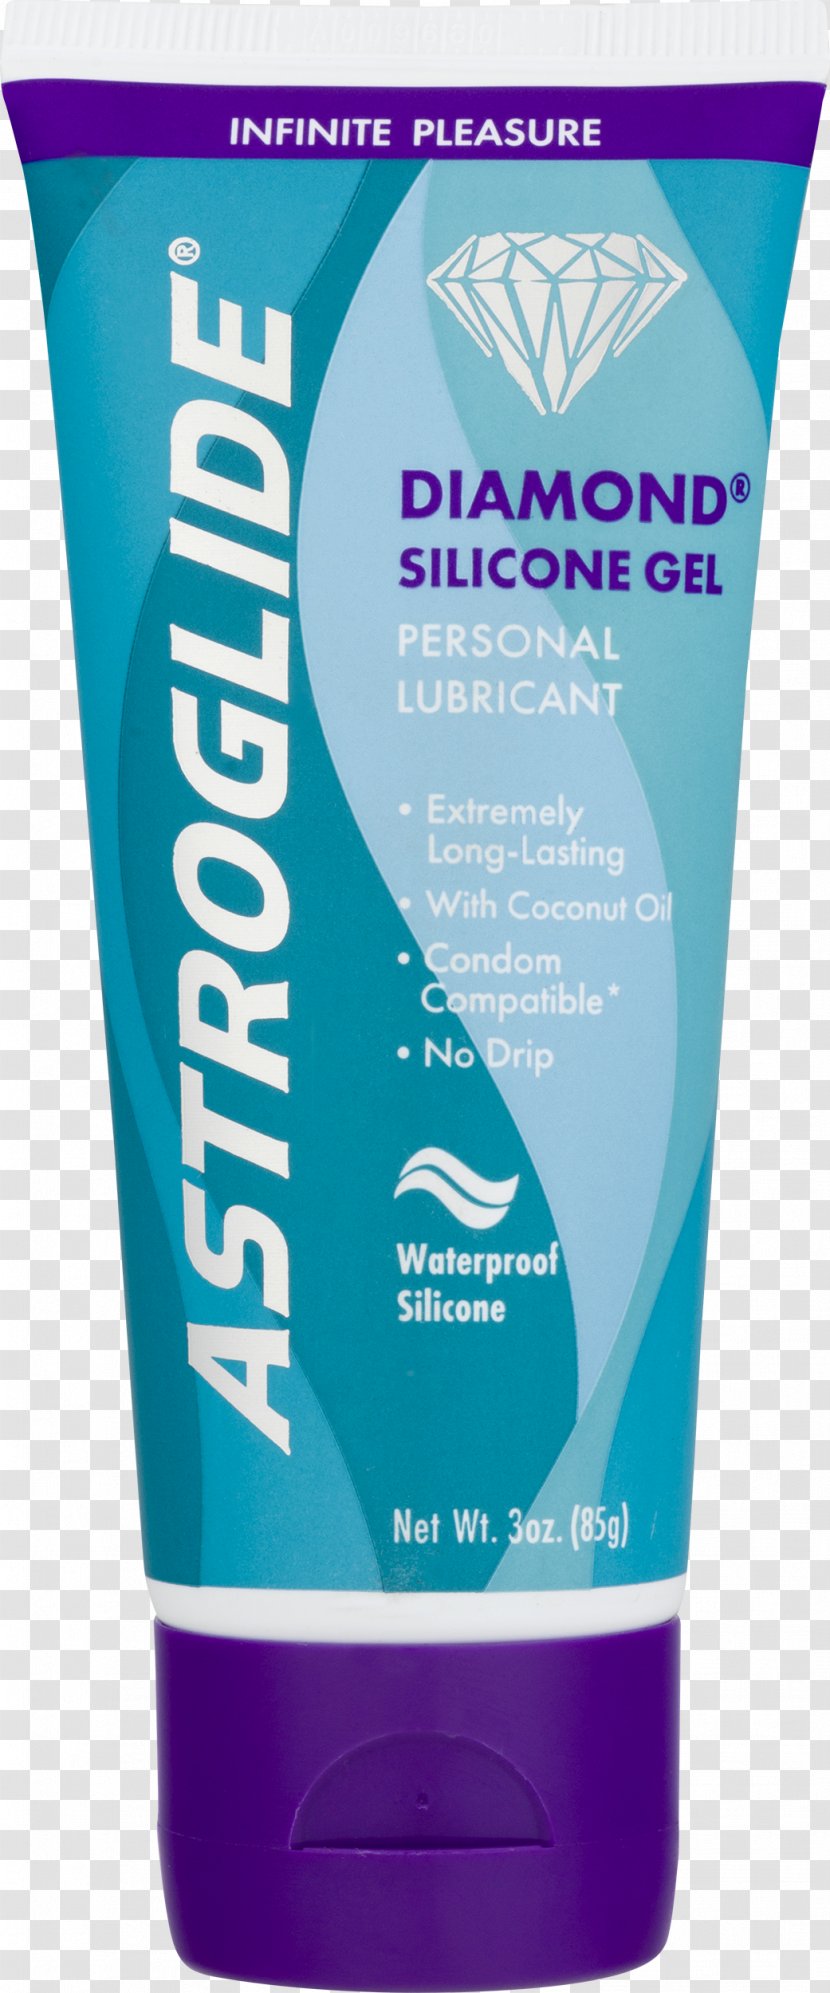 Personal Lubricants & Creams Silicone Gel Astroglide - Product Sample Transparent PNG